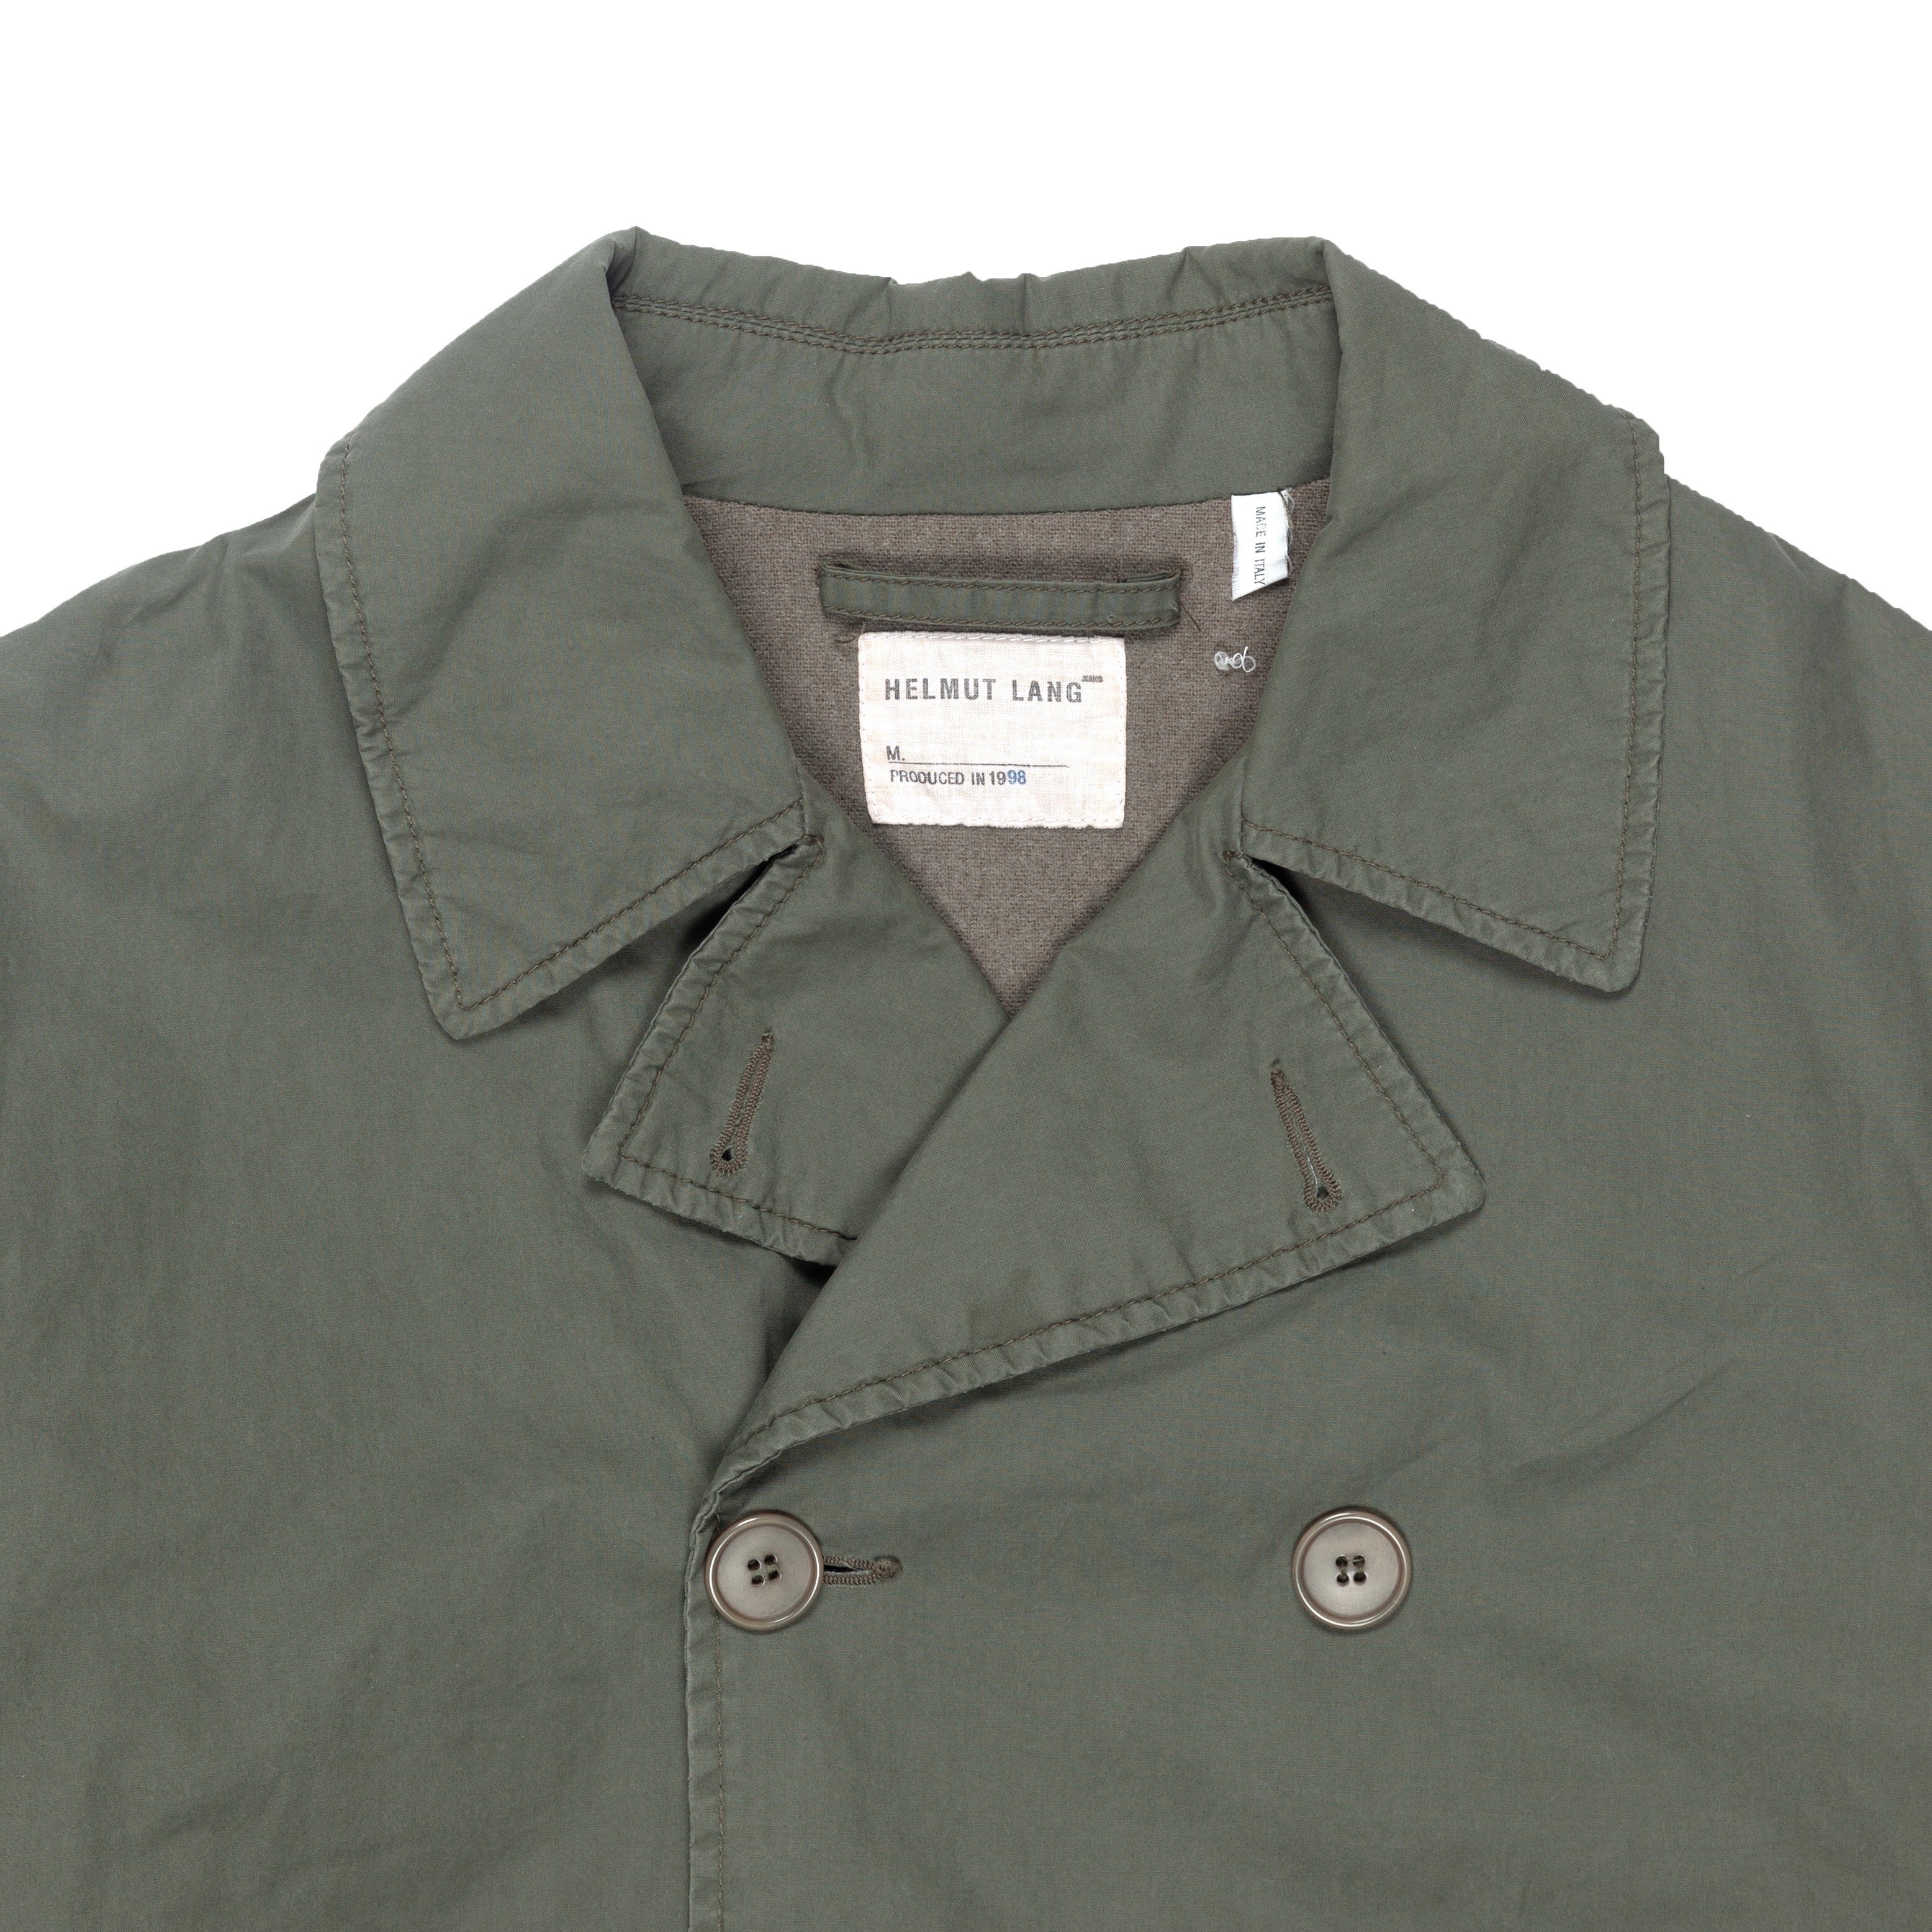 Helmut Lang Olive Pea Coat - AW98 - SILVER LEAGUE